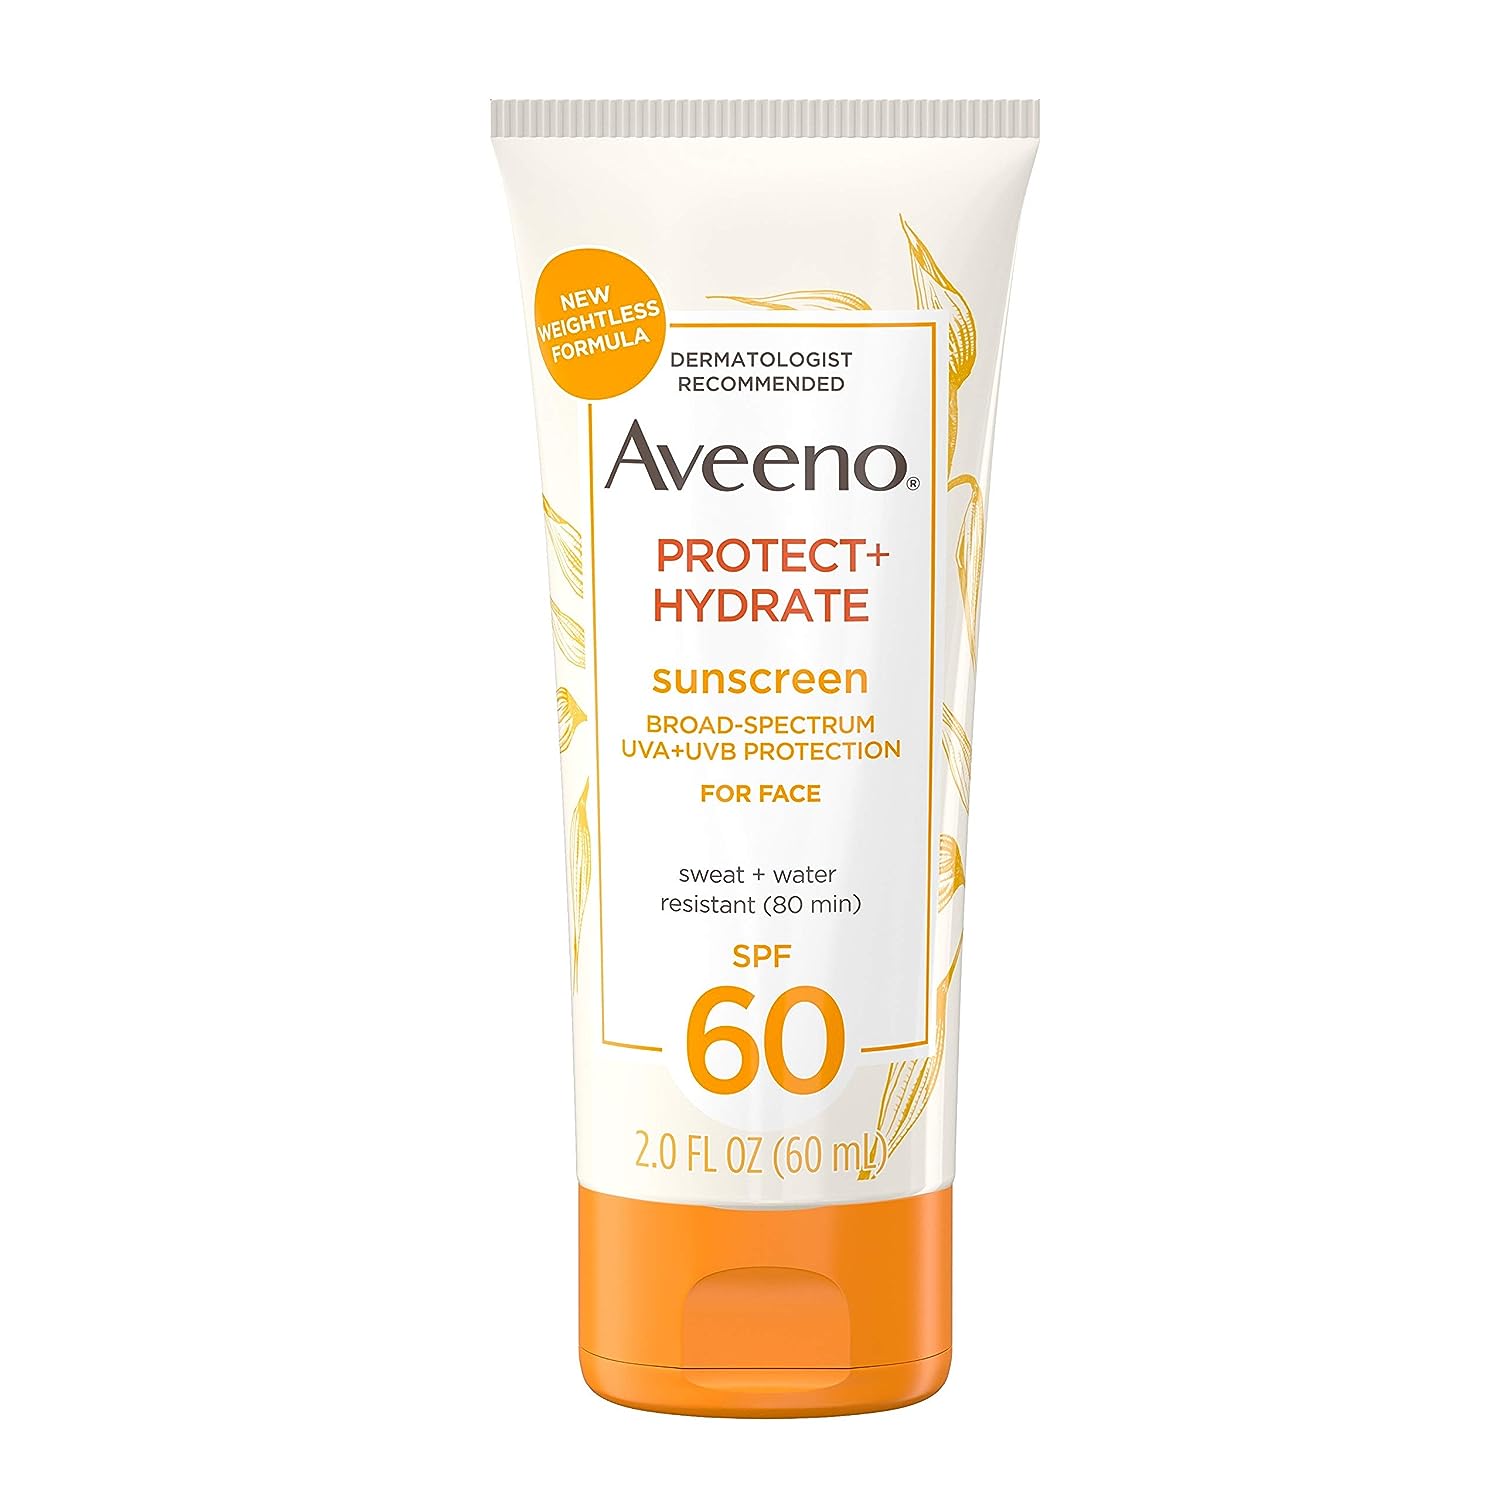 KEM CHỐNG NẮNG AVEENO PROTECT HYDRATE SPF60